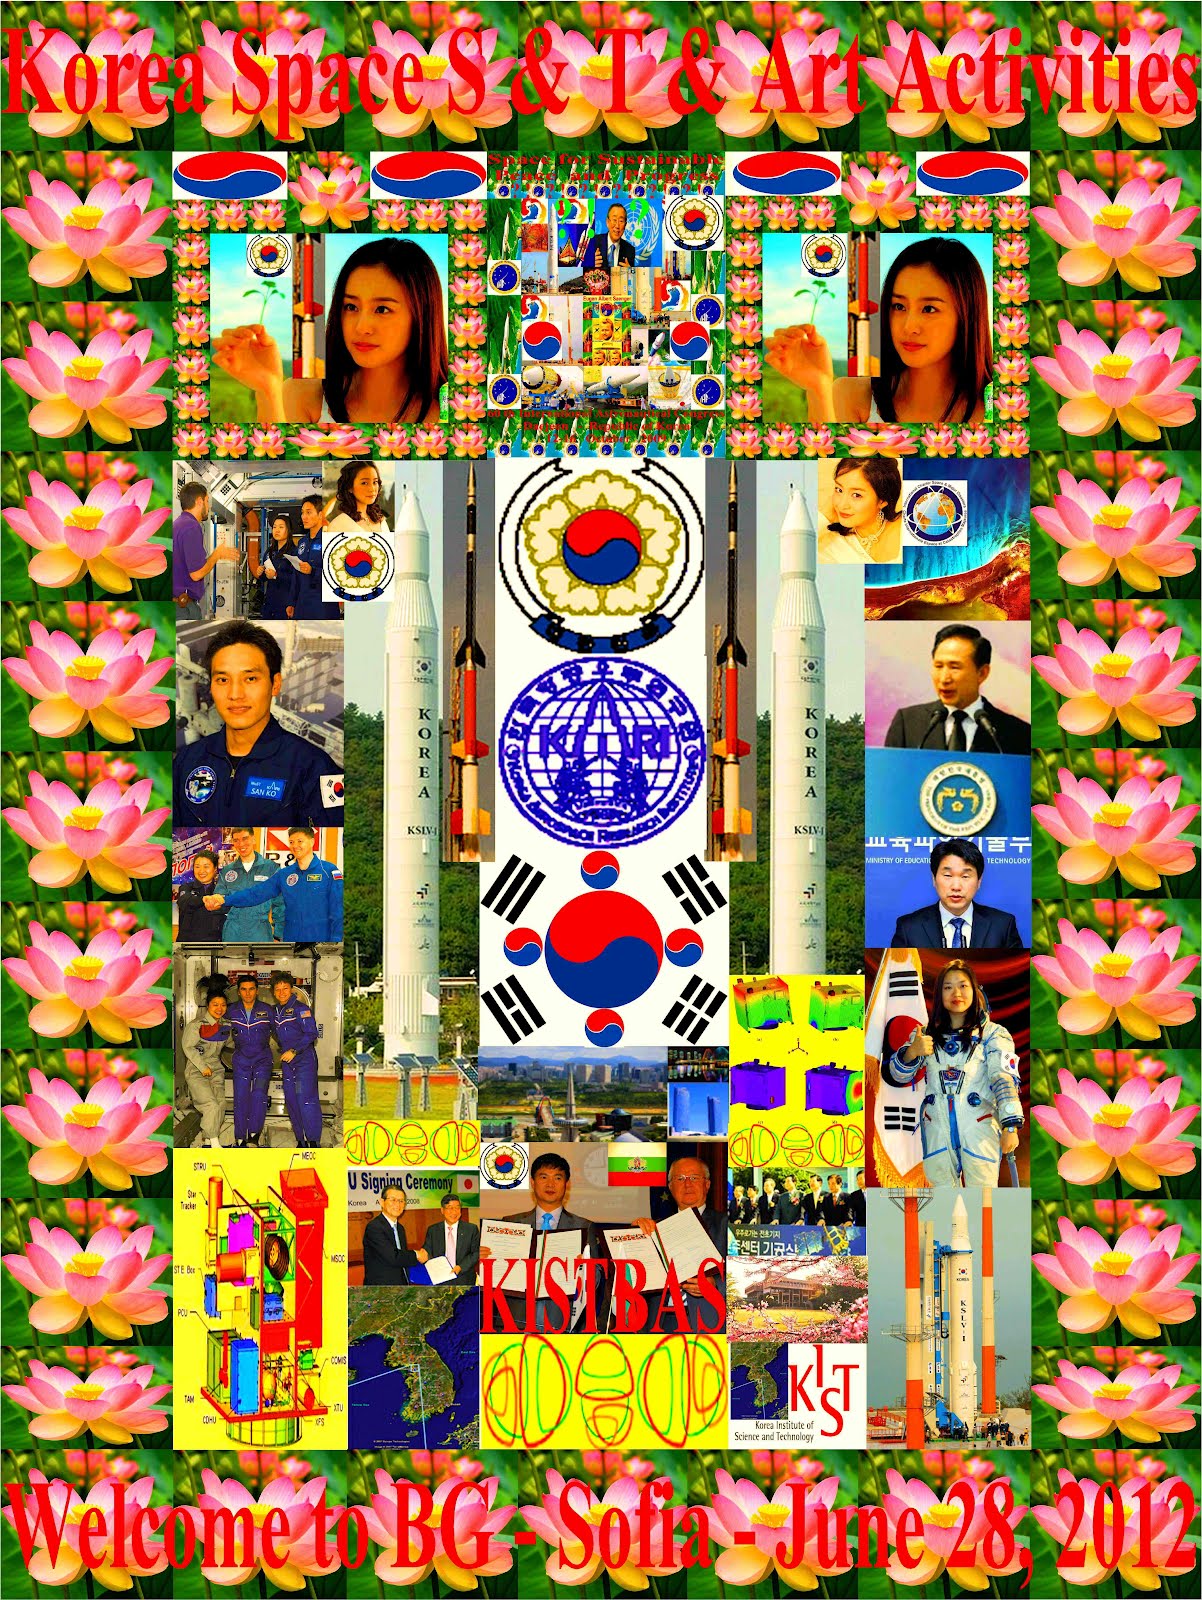 KOREA - SPACE S&T&ART ACTIVITIES - SEARCHING COSMICAL STRATEGIC PARTNERSHIPS - WELCOME - 28-VI-2012